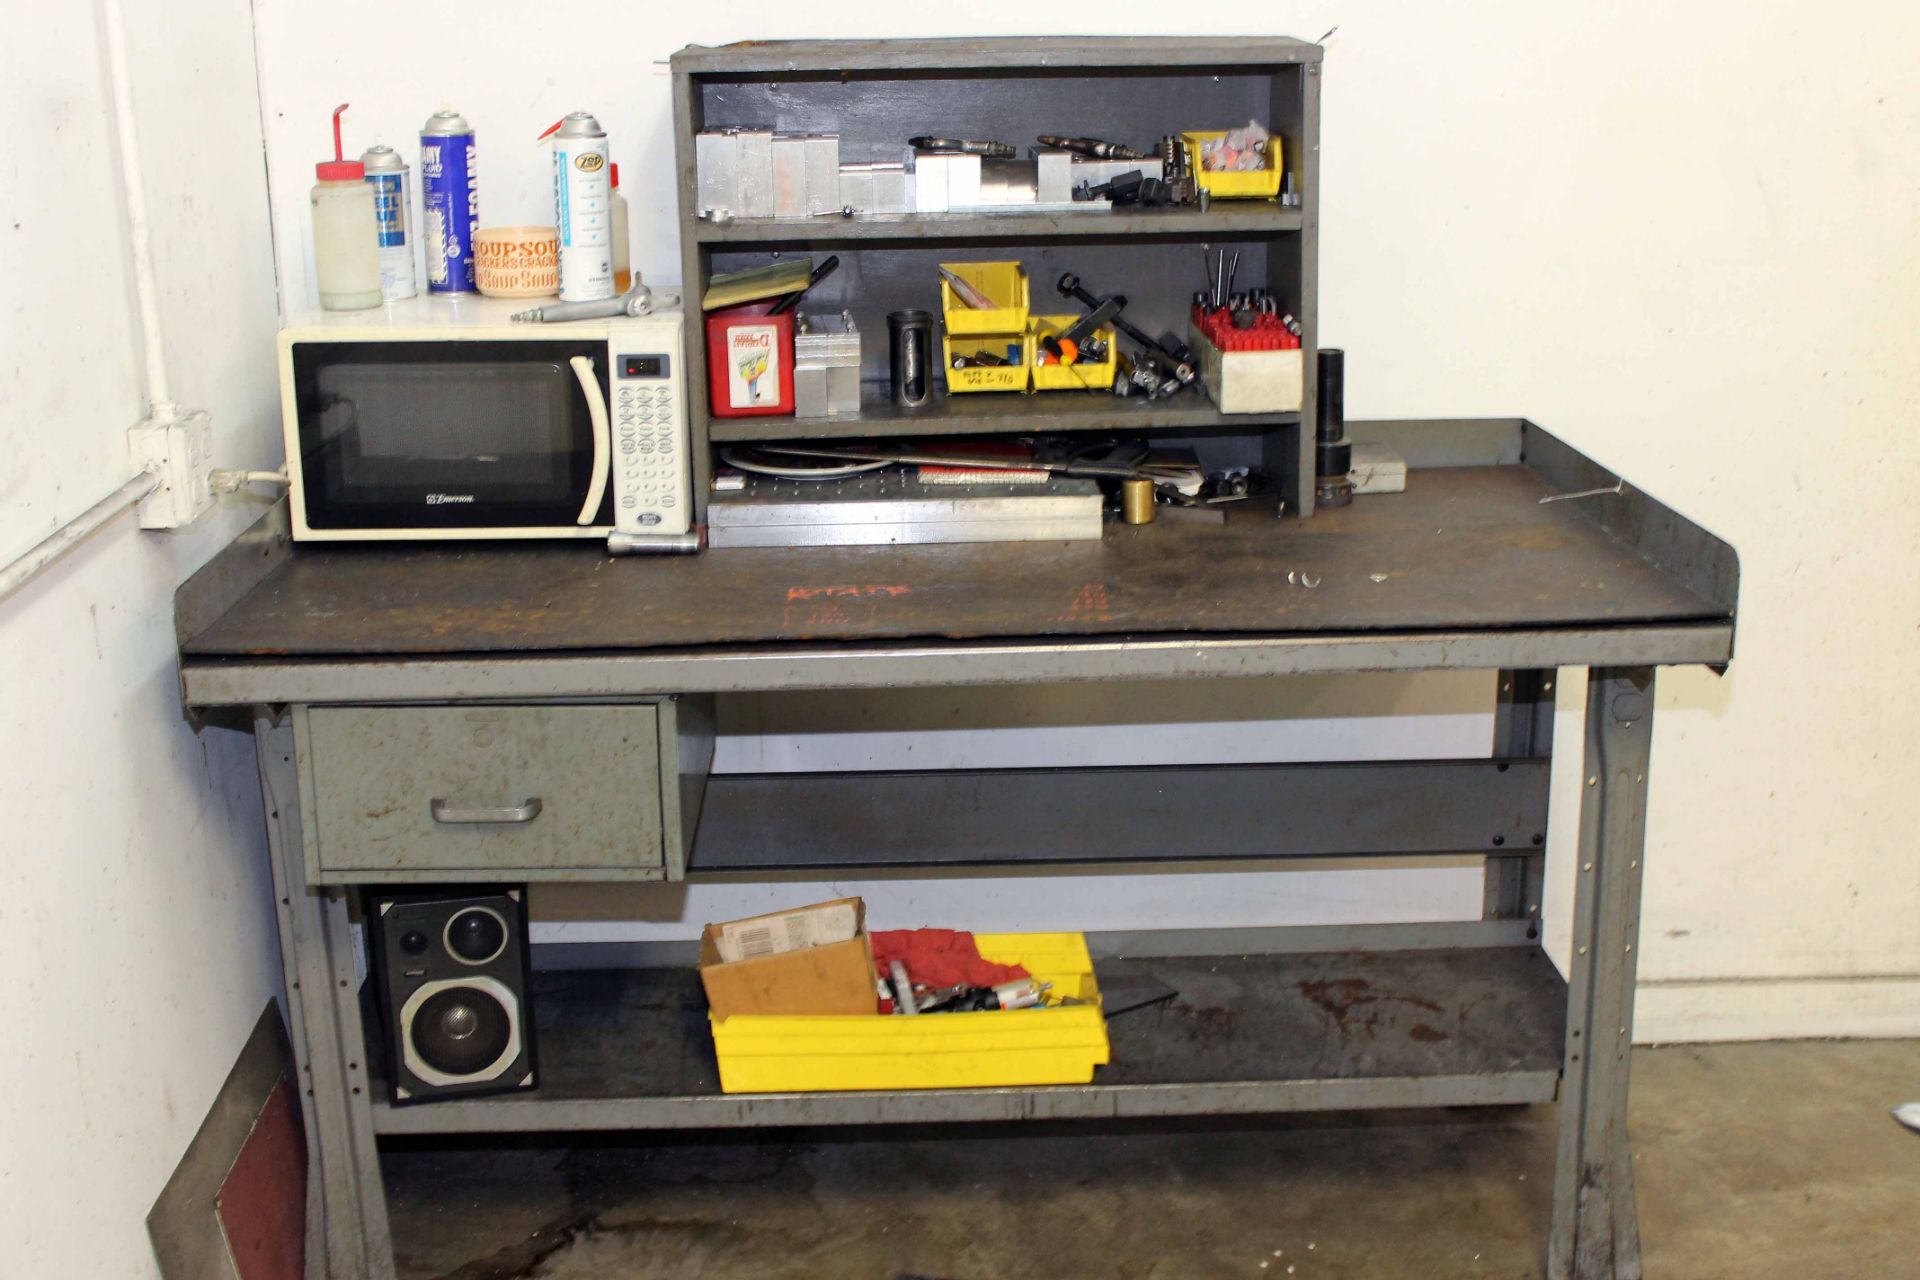 LOT CONSISTING OF STEEL WORKBENCH w/contents & STEEL SHELVING UNIT